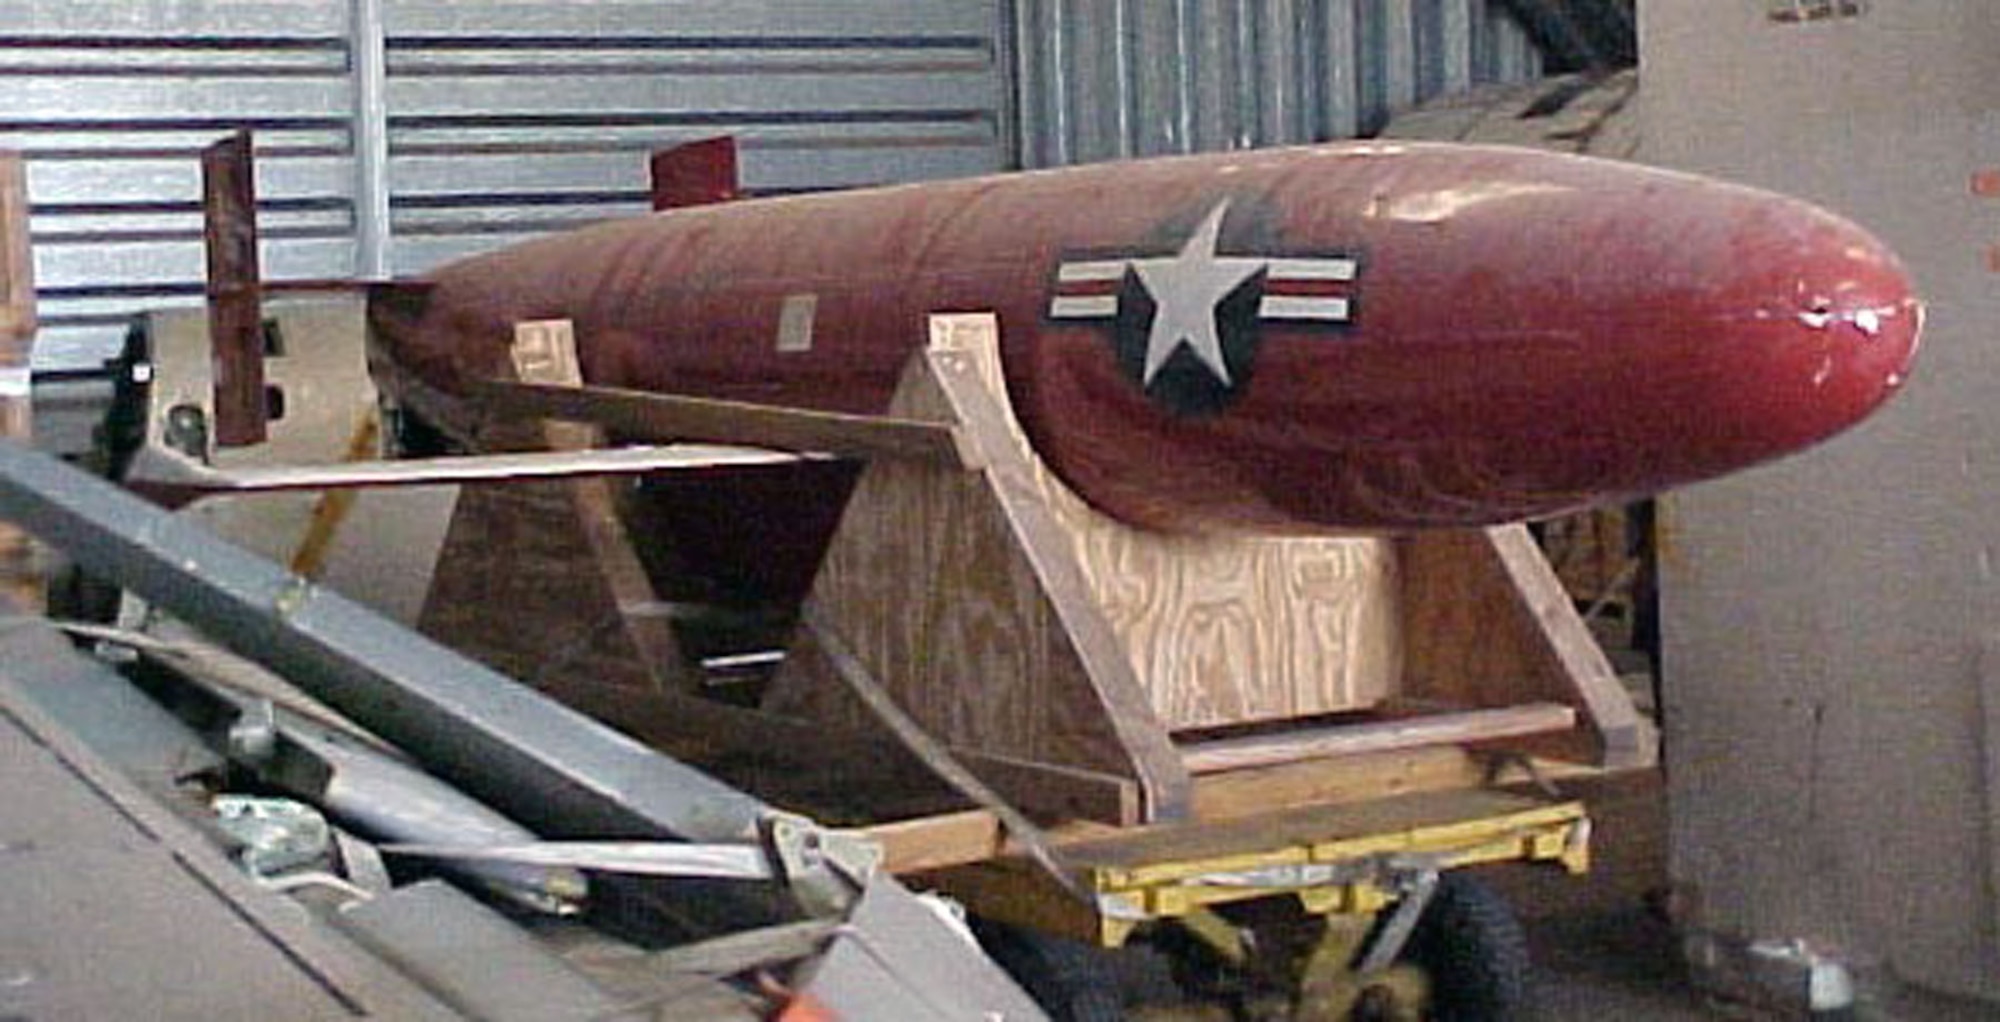 The GAM-67 (Guided Air Missile) was a pilotless drone initially designed as a high altitude target. The Crossbow was powered by a Continental J69 gas turbine and could achieve speeds approaching Mach I. The Crossbow was also capable of being ground launched using a zero length rail system. The GAM-67 was controlled through ground control signals and an onboard autopilot. (U.S. Air Force photo)